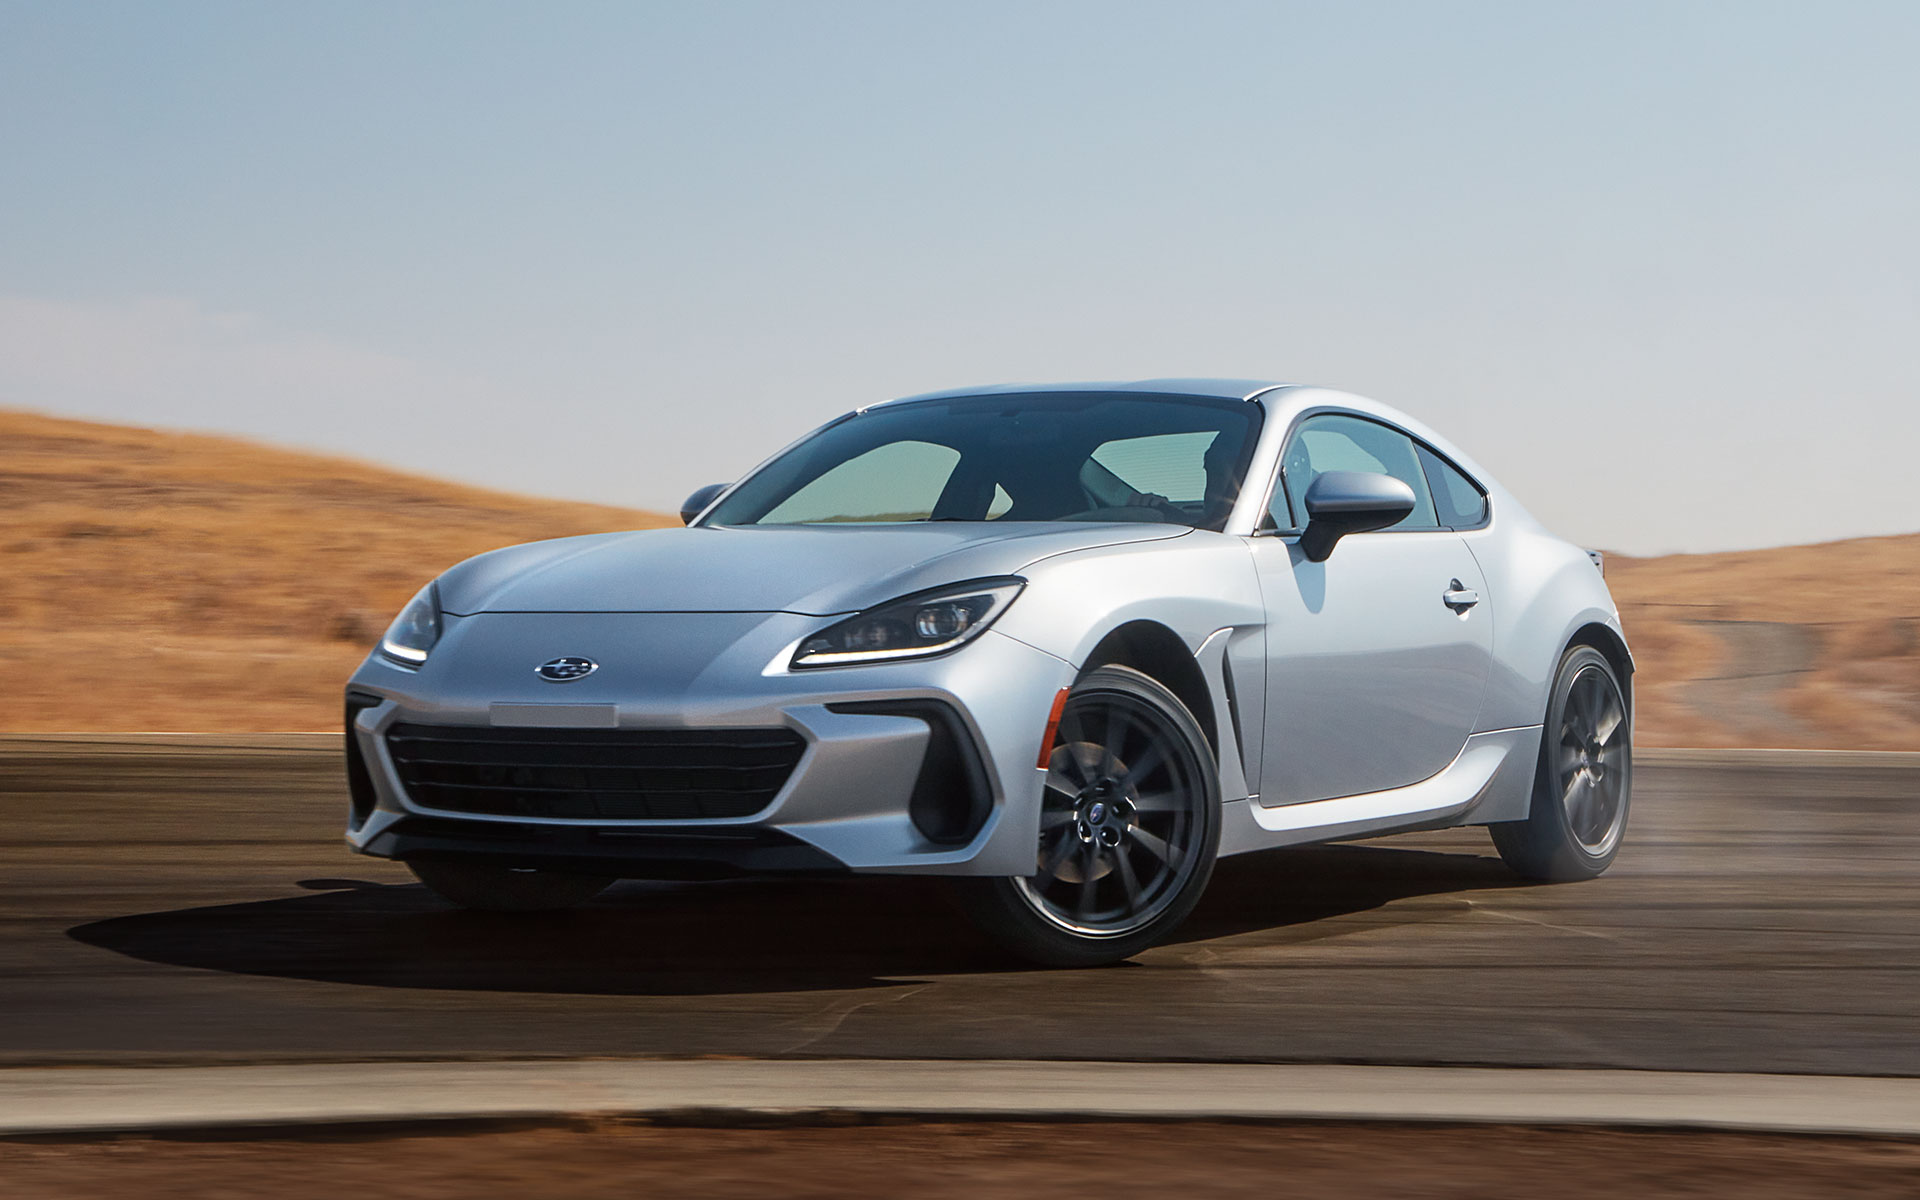 2022 Subaru BRZ Limited shown in Ice Silver Metallic rounding a curve on a highway.